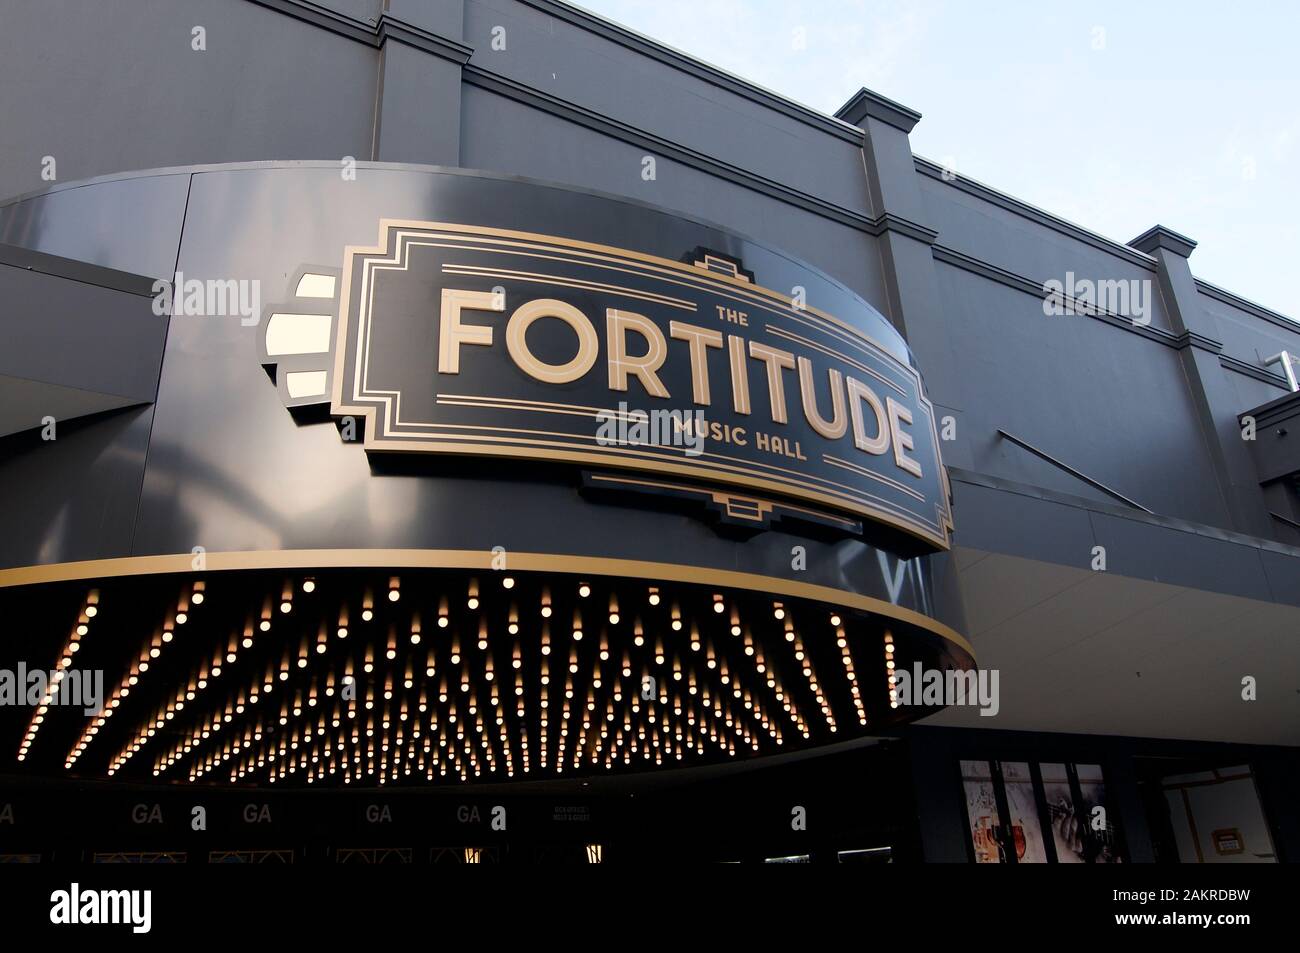 Brisbane, Queensland, Australia - 13th November 2019 : View of the Art Deco inspired Fortitude music hall entrance located in Fortitude Valley distric Stock Photo